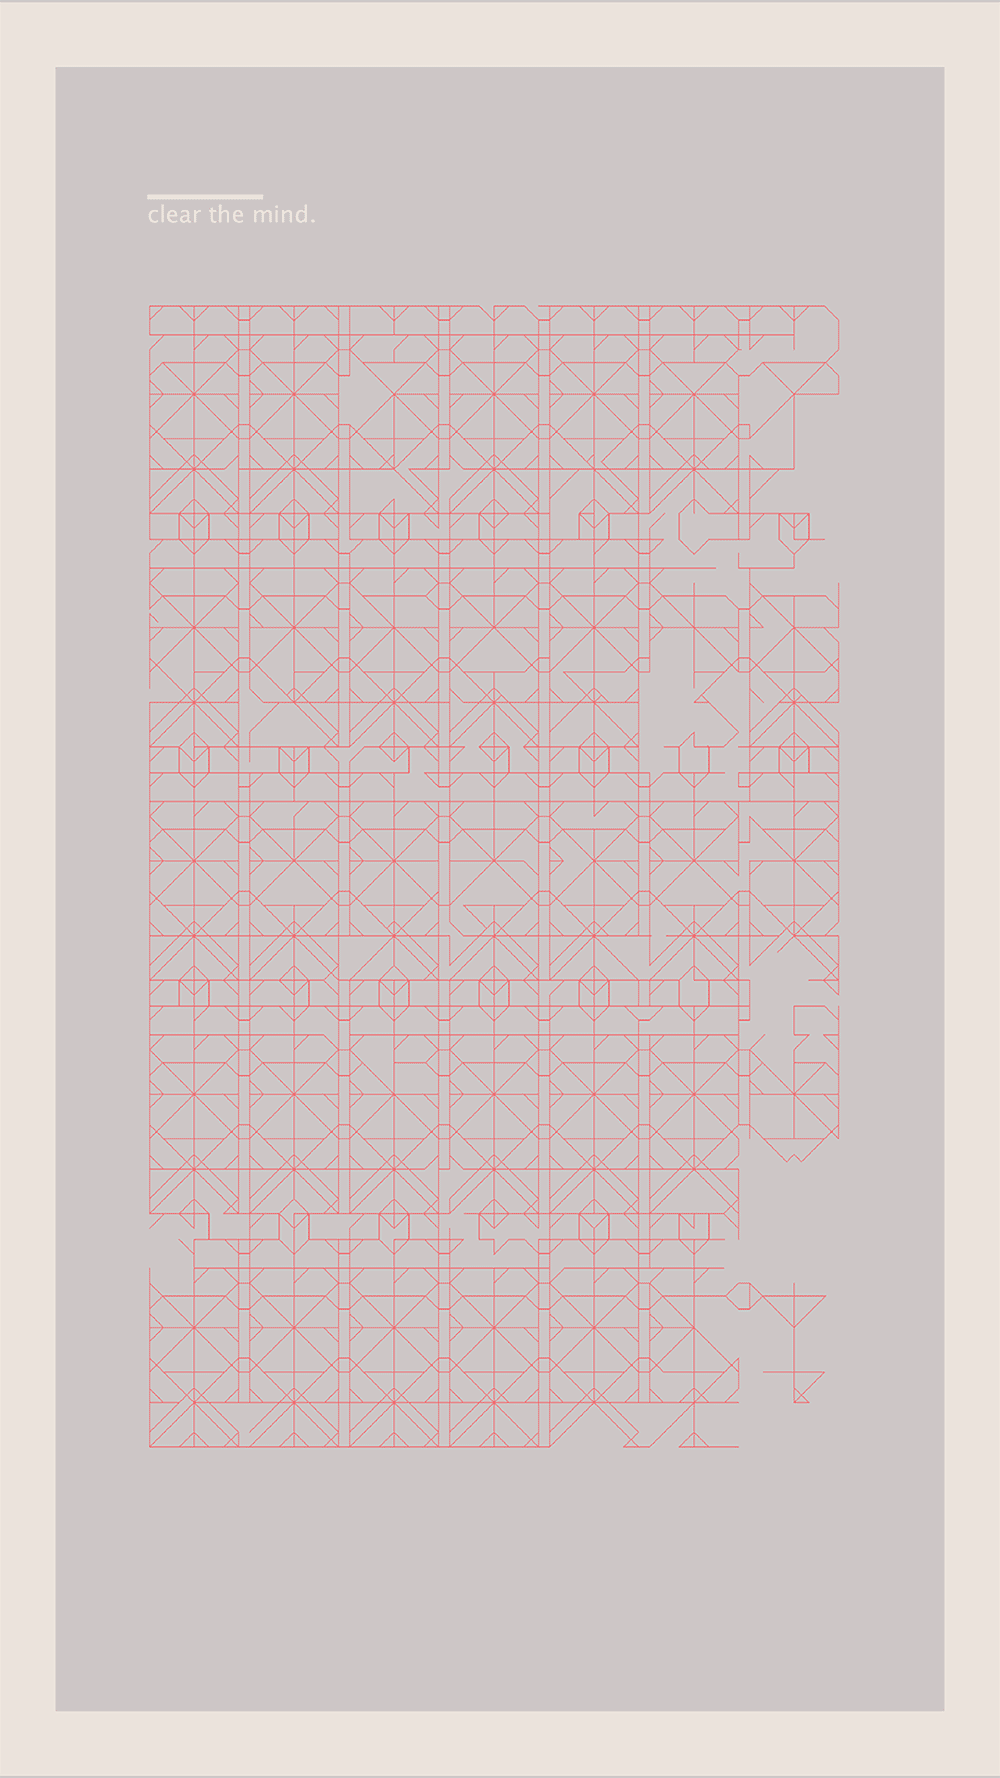 Lines retreat to reveal angular letterforms